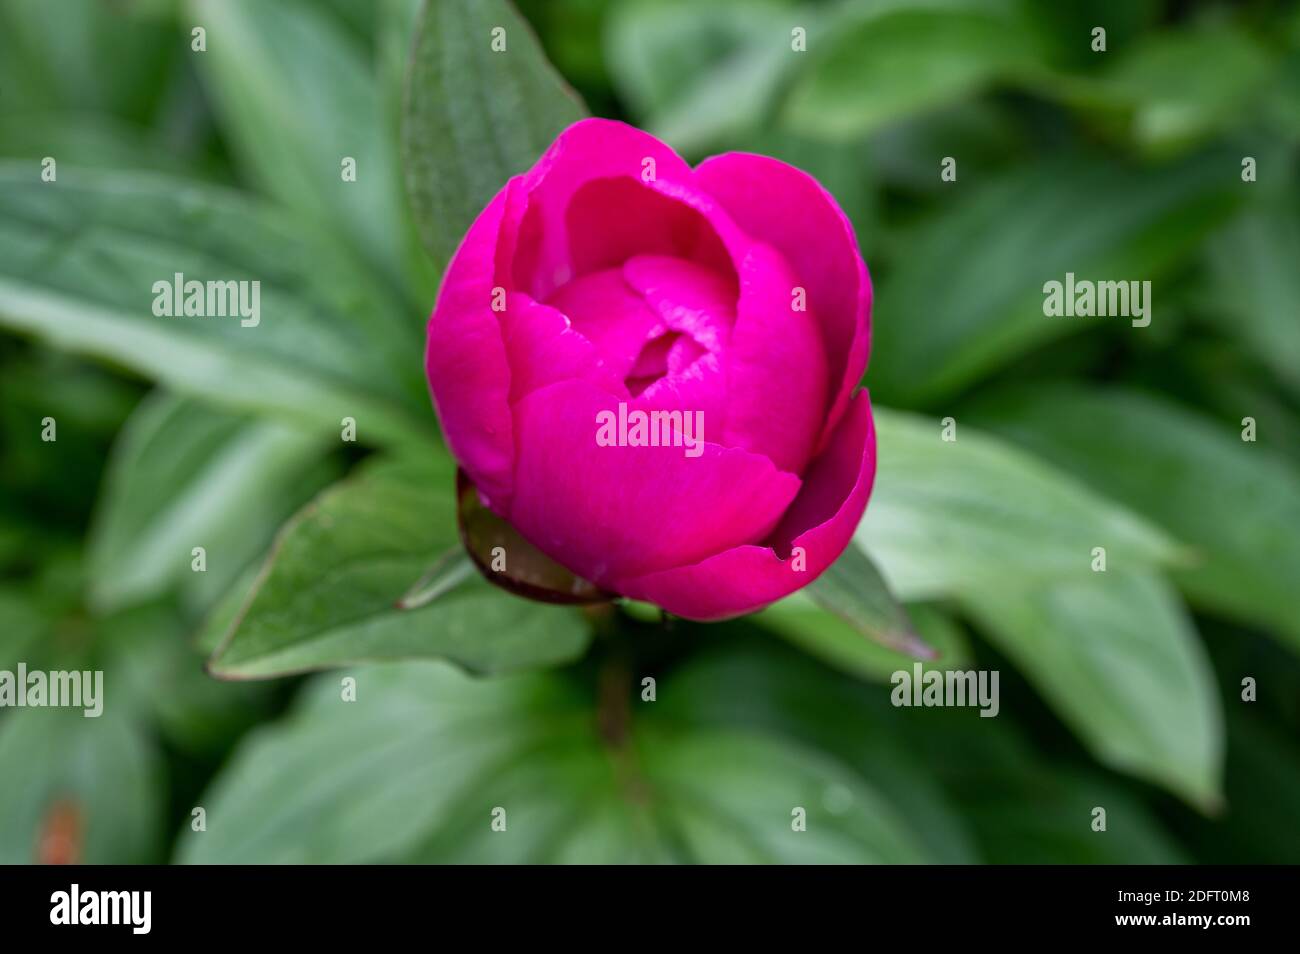 Blossom of pink peony flowers close up Stock Photo